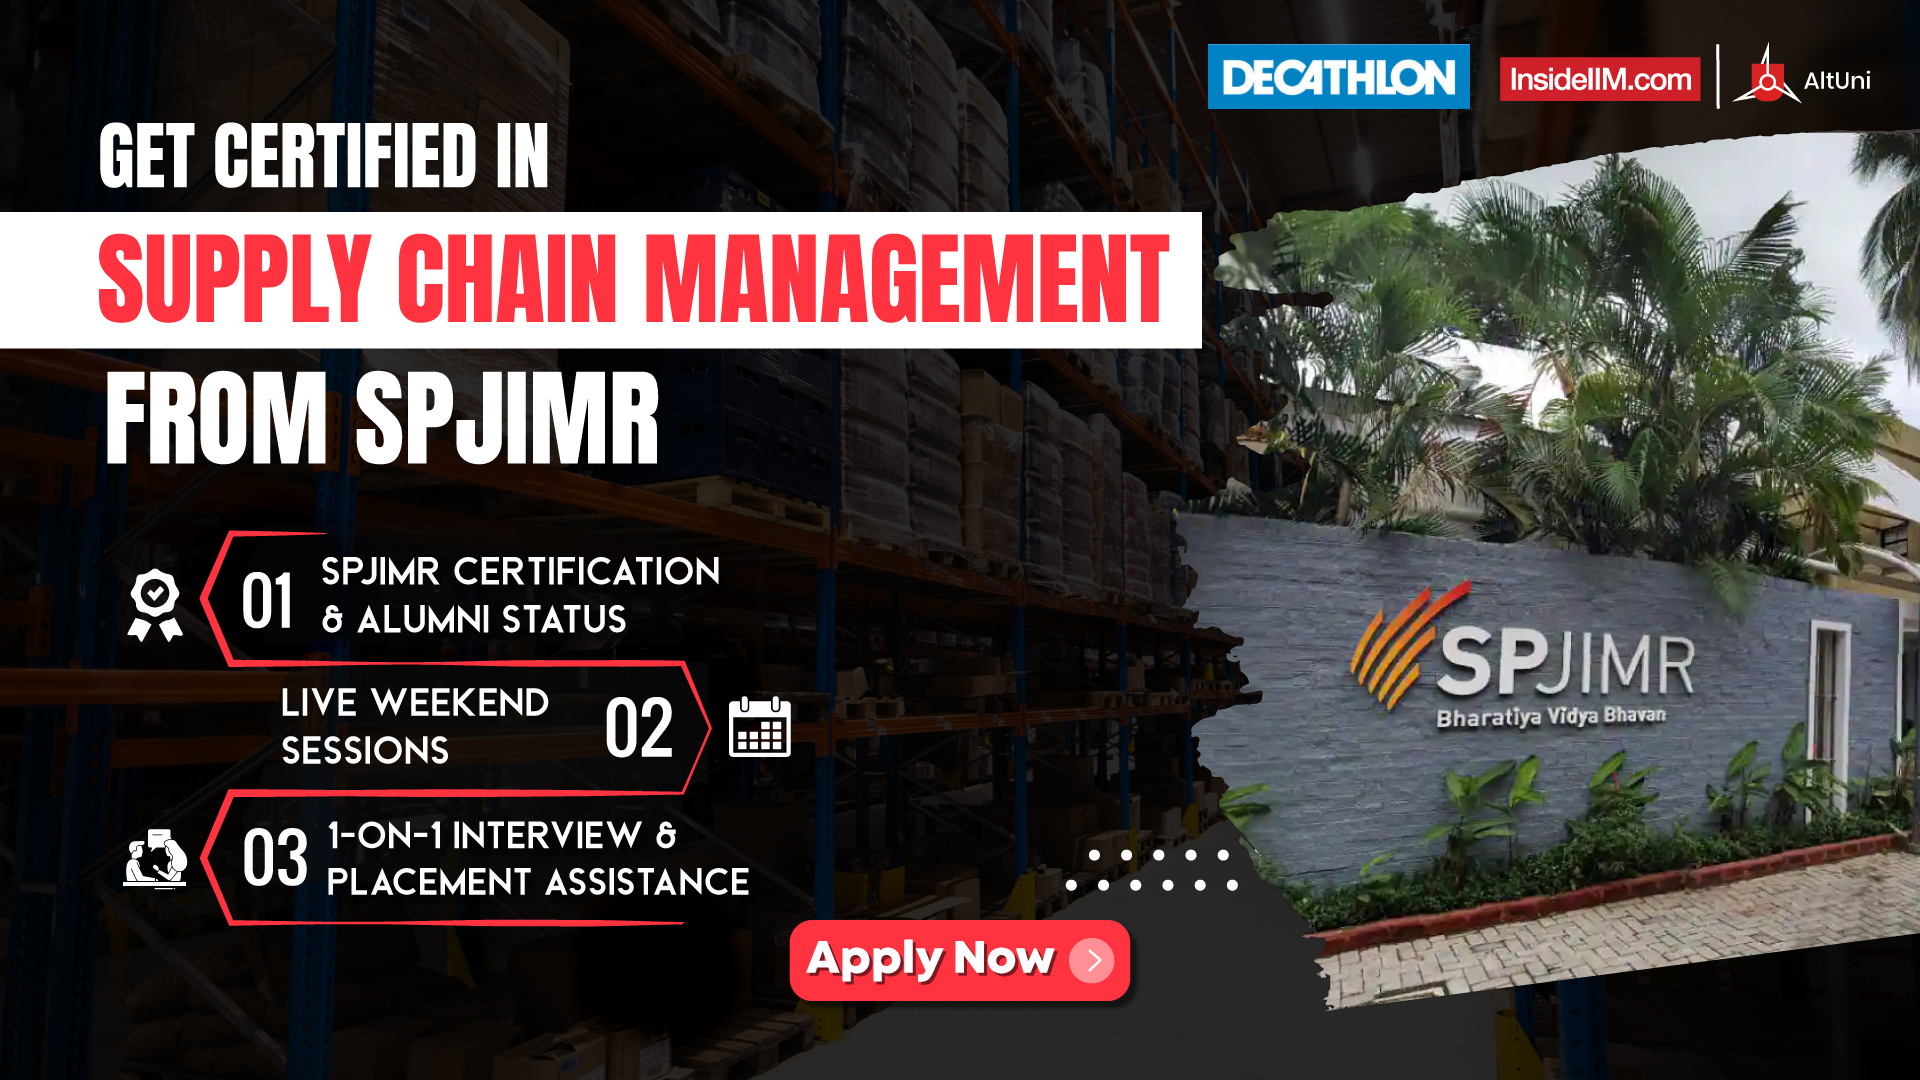 Learn Supply Chain Management from SPJIMR faculty, get certified by them & unlock interview opportunities with Decathlon.